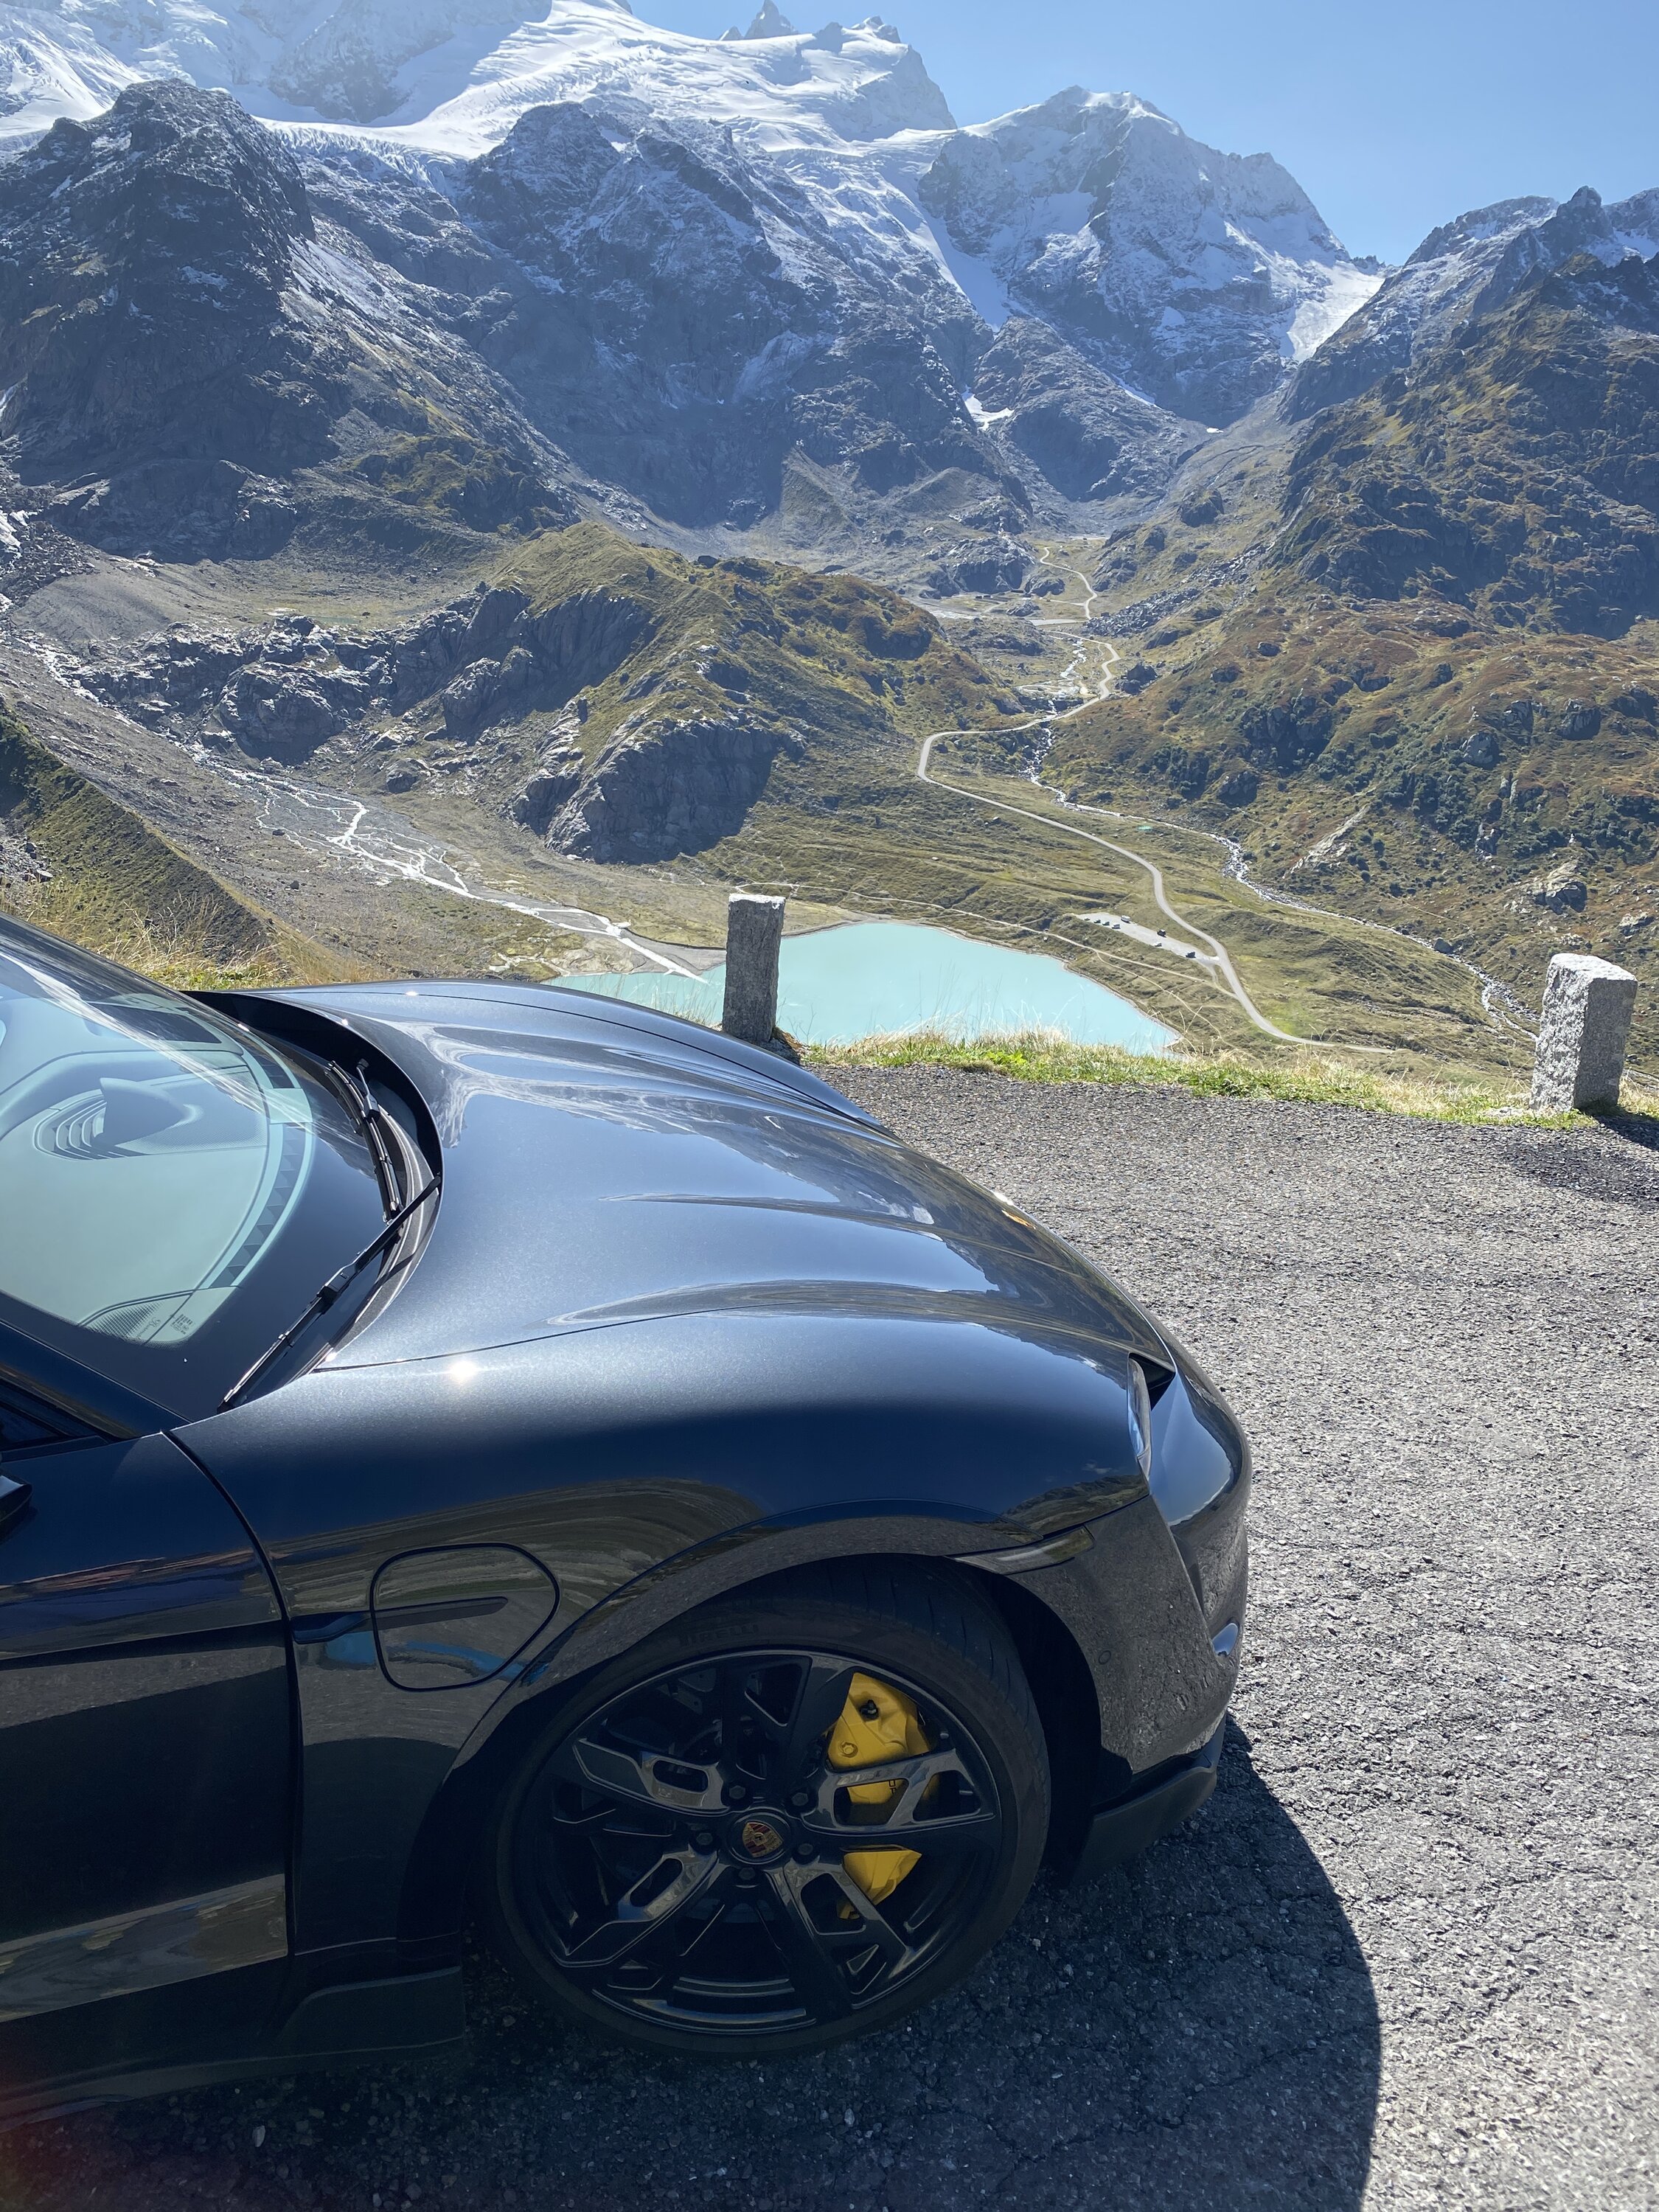 Porsche Taycan Location! Location! Location!  Post Artistic Photos of Your Taycan with Scenery Pass2.JPG